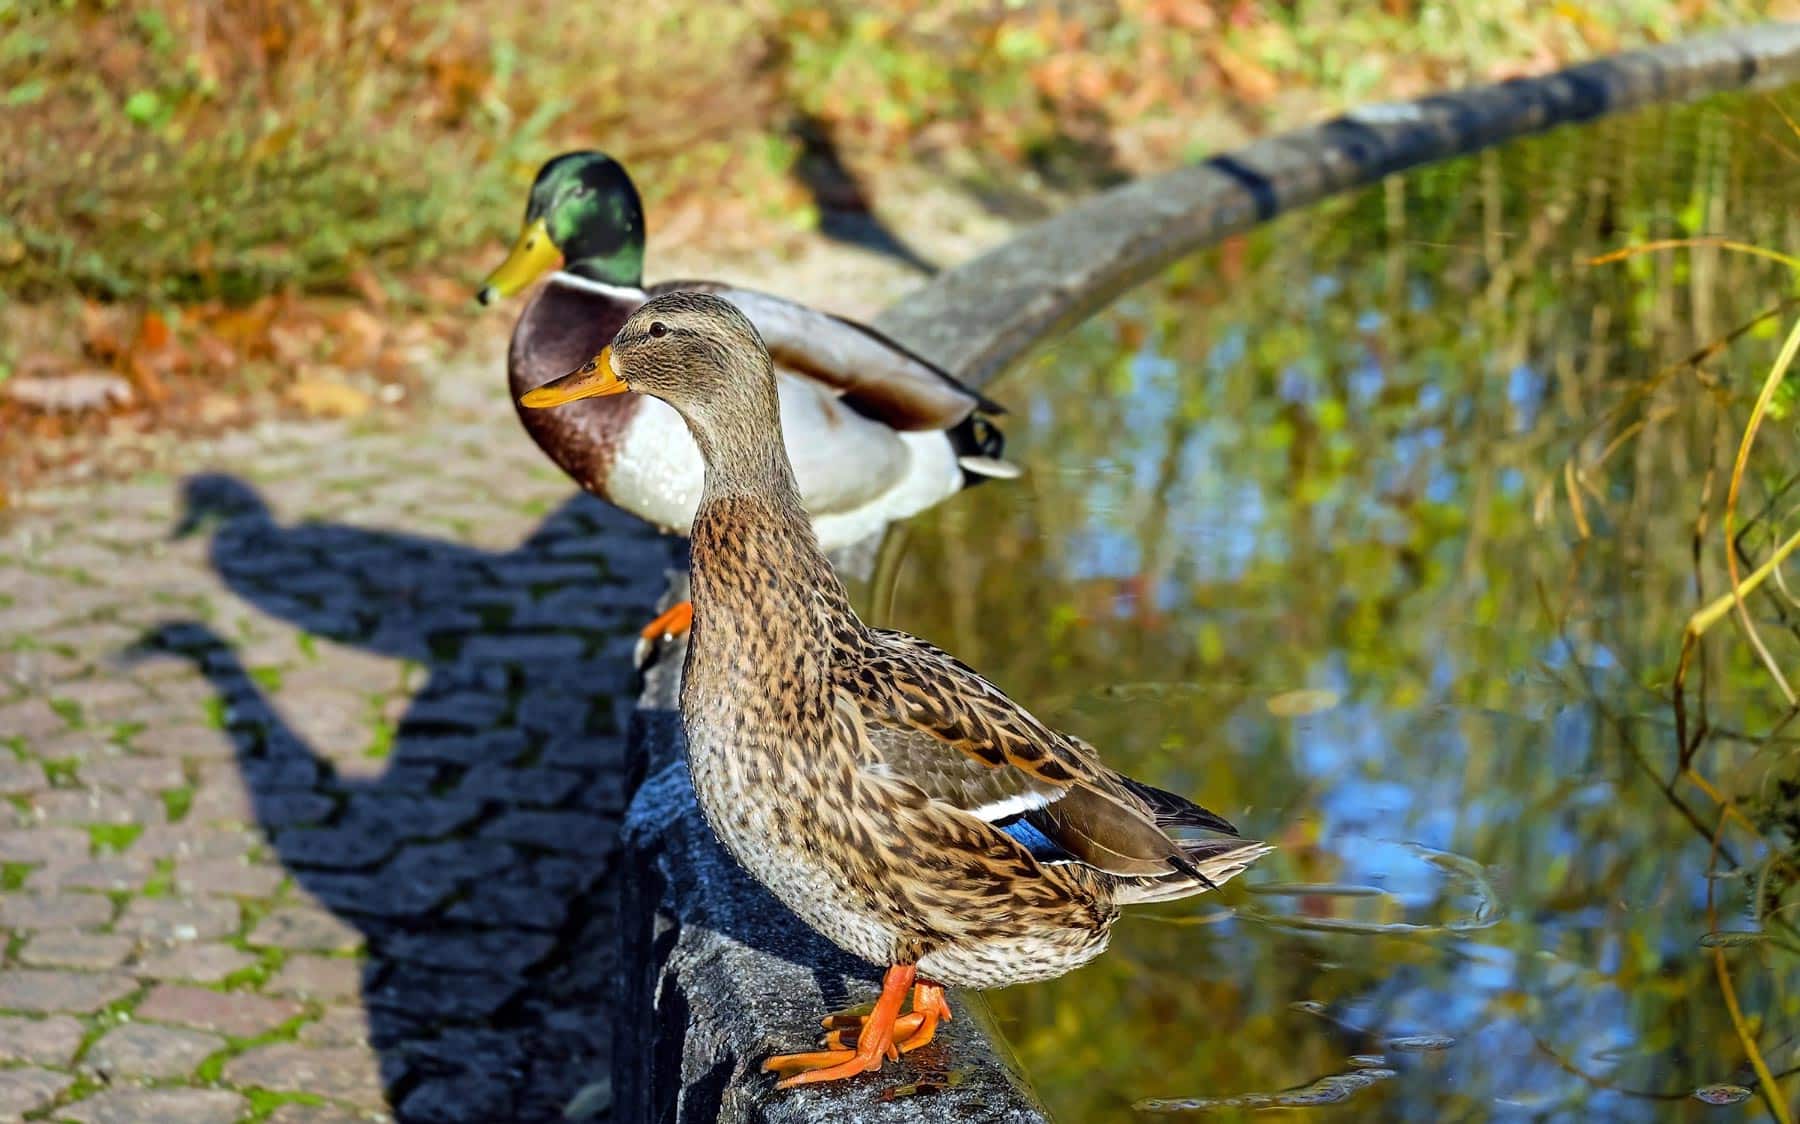 two ducks standing near a swimming pool